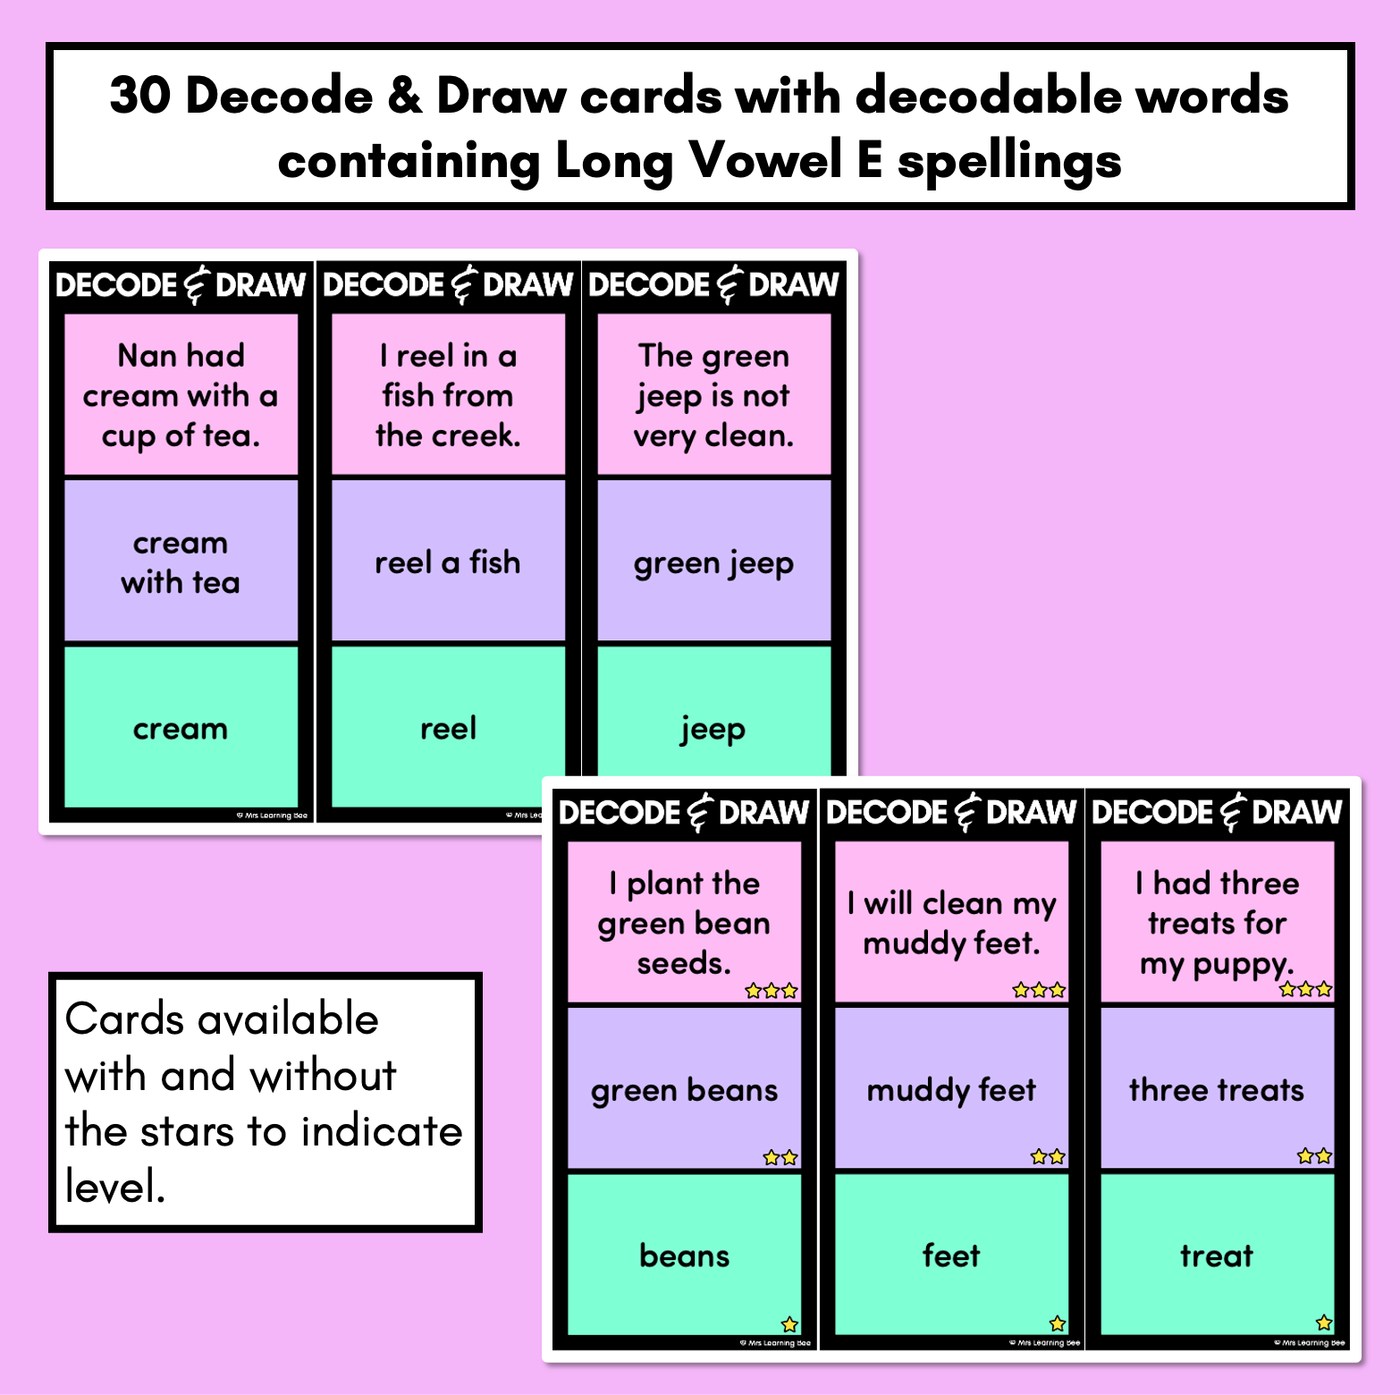 DECODE & DRAW - LONG VOWEL E - Decodable Drawing Phonics Task Cards